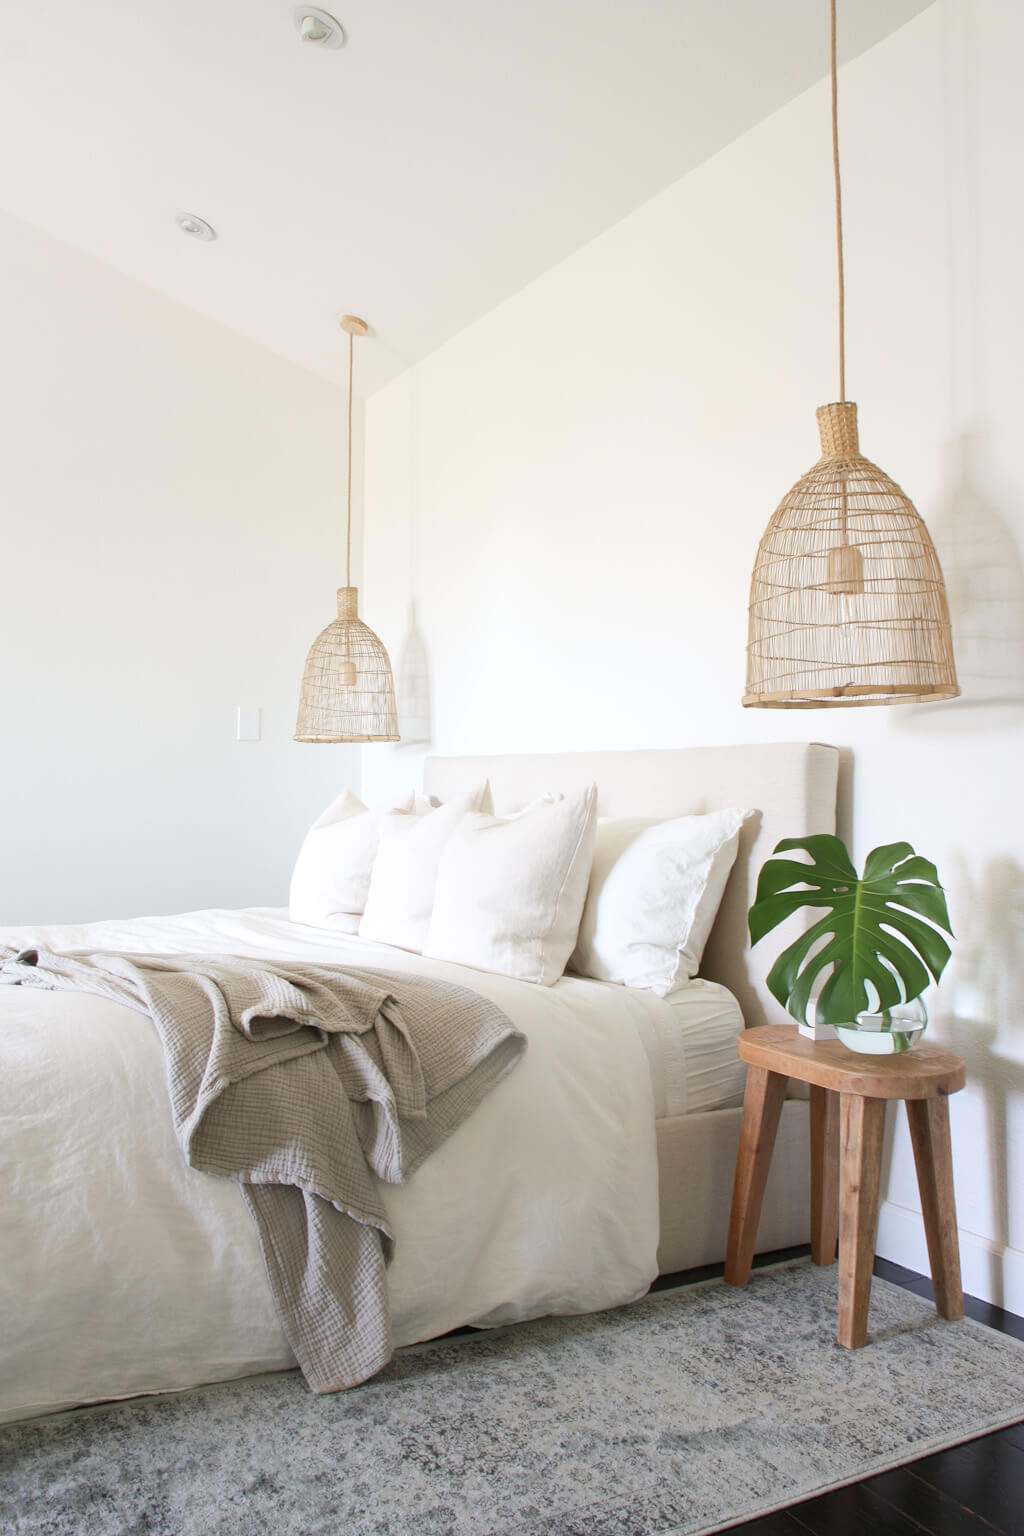 white and cream bedroom with king bed, rug runners, wood side tables and woven seagrass pendants